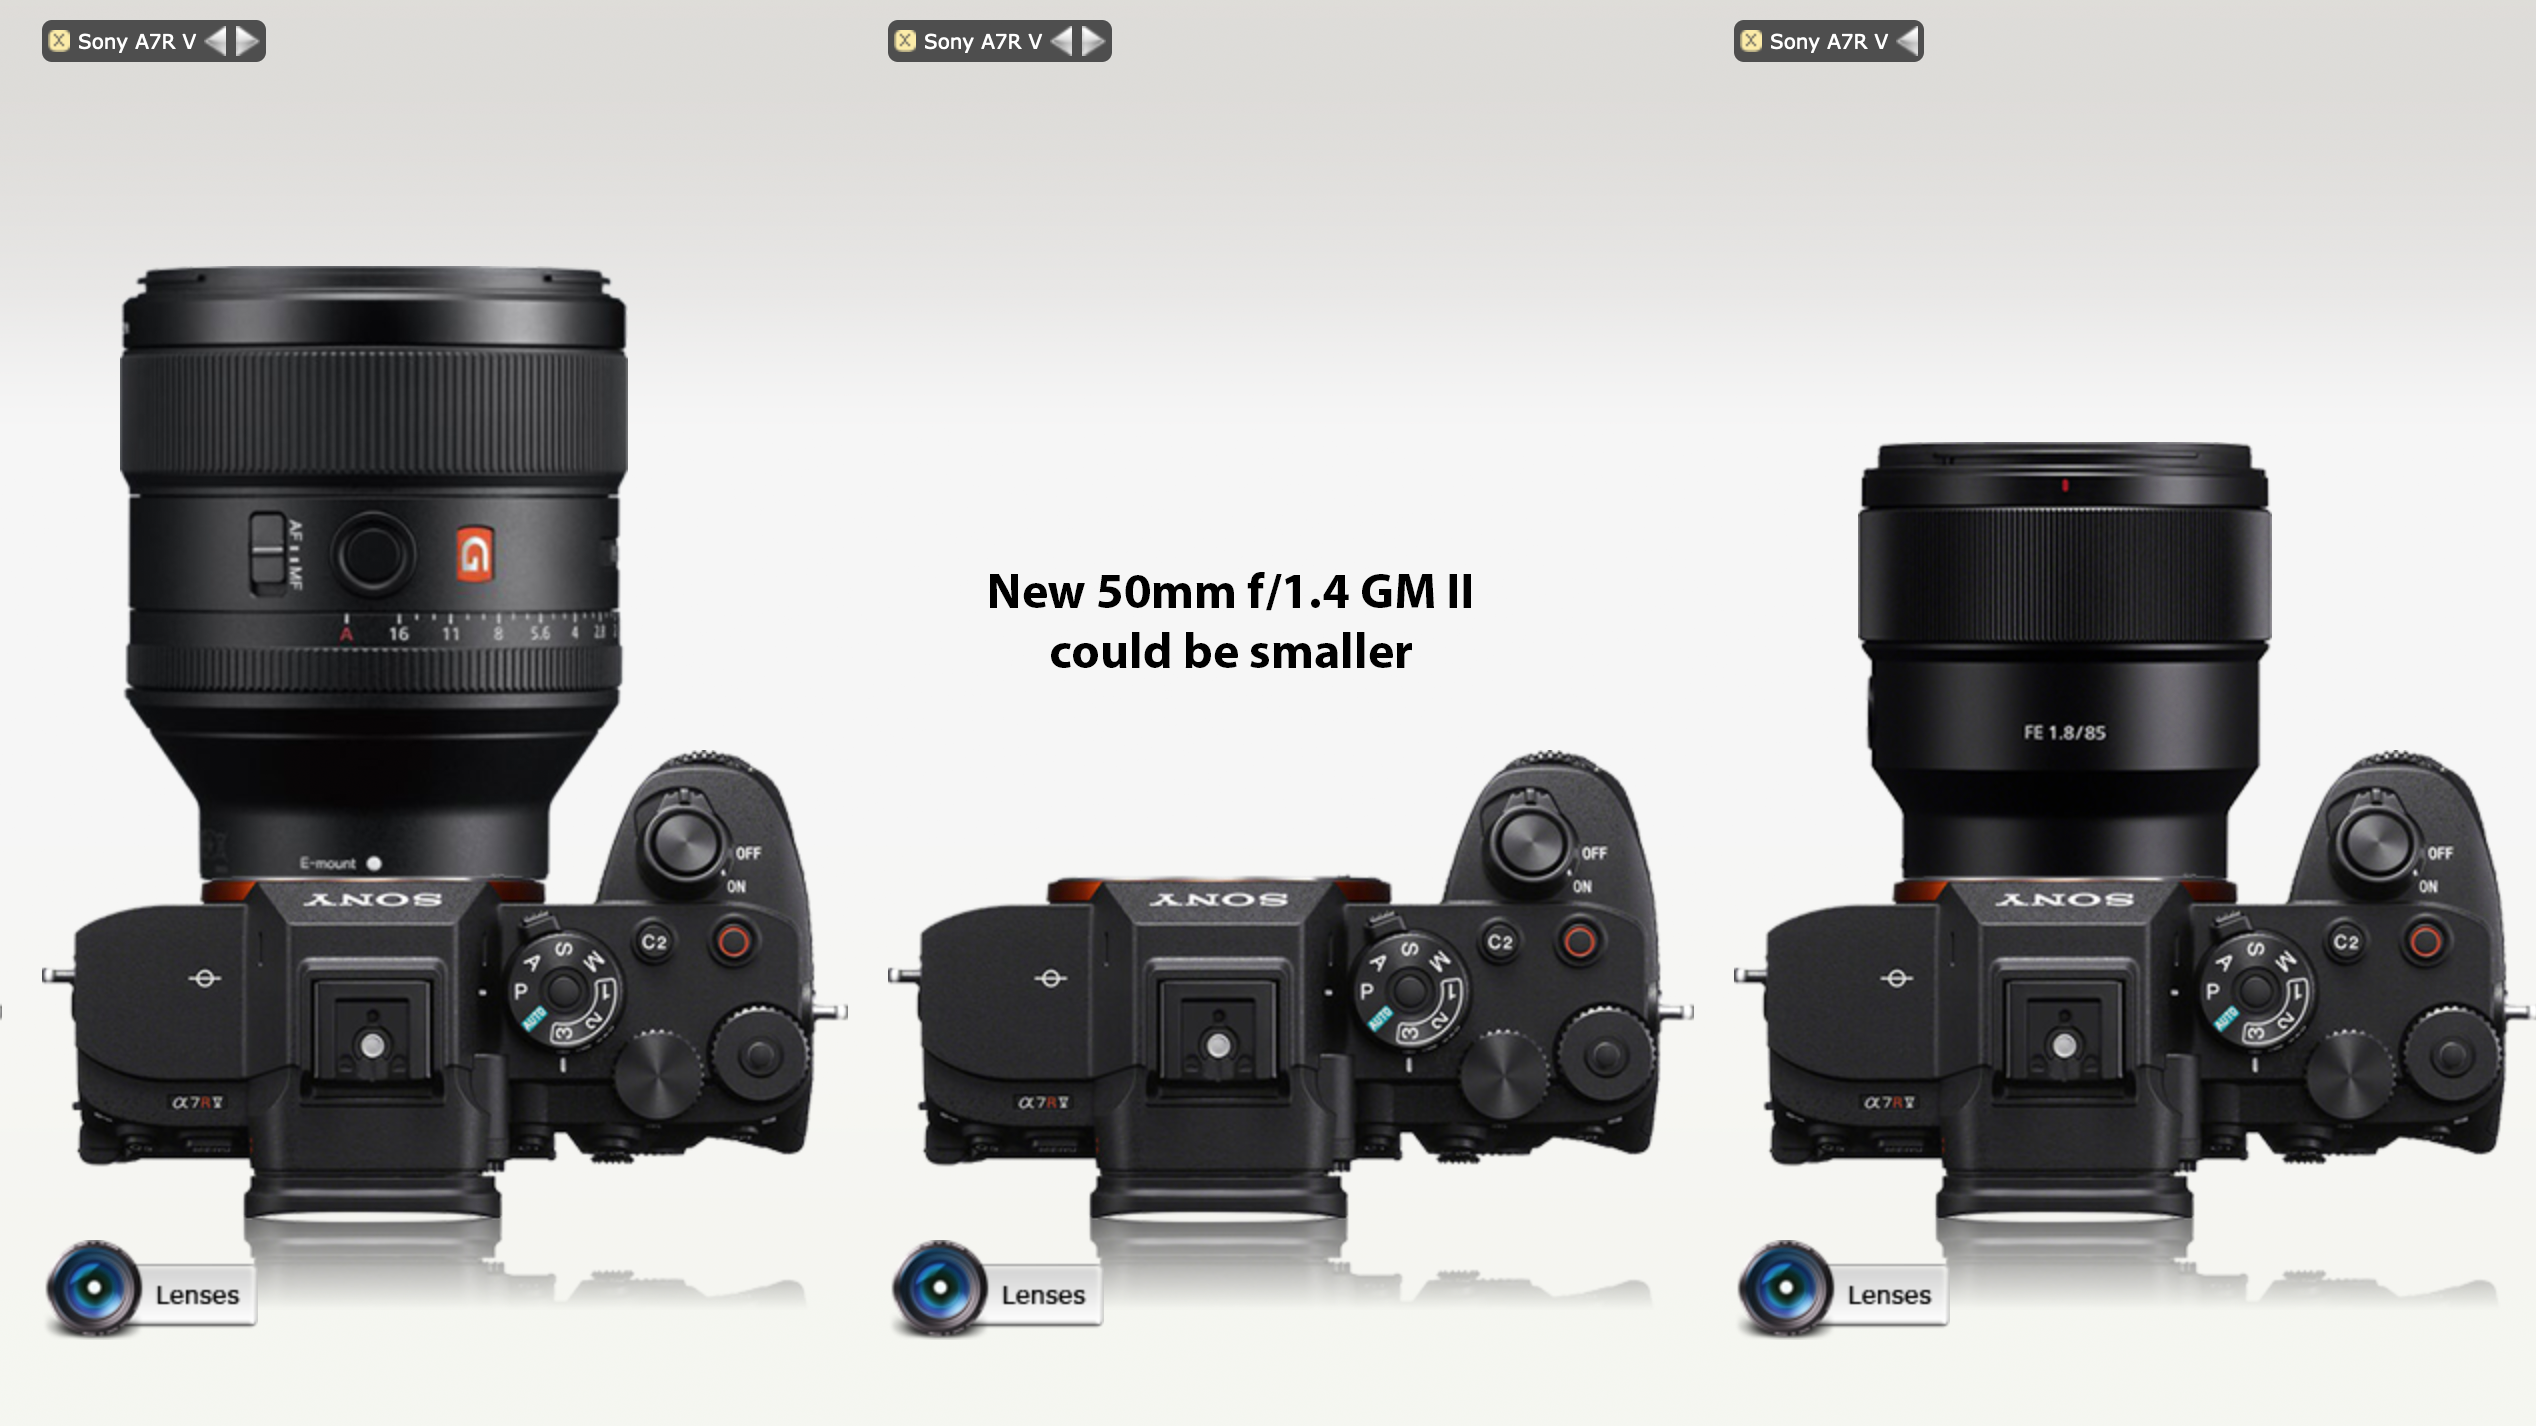 New firmware update for the Sigma 30mm f/1.4 E-mount lens – sonyalpharumors